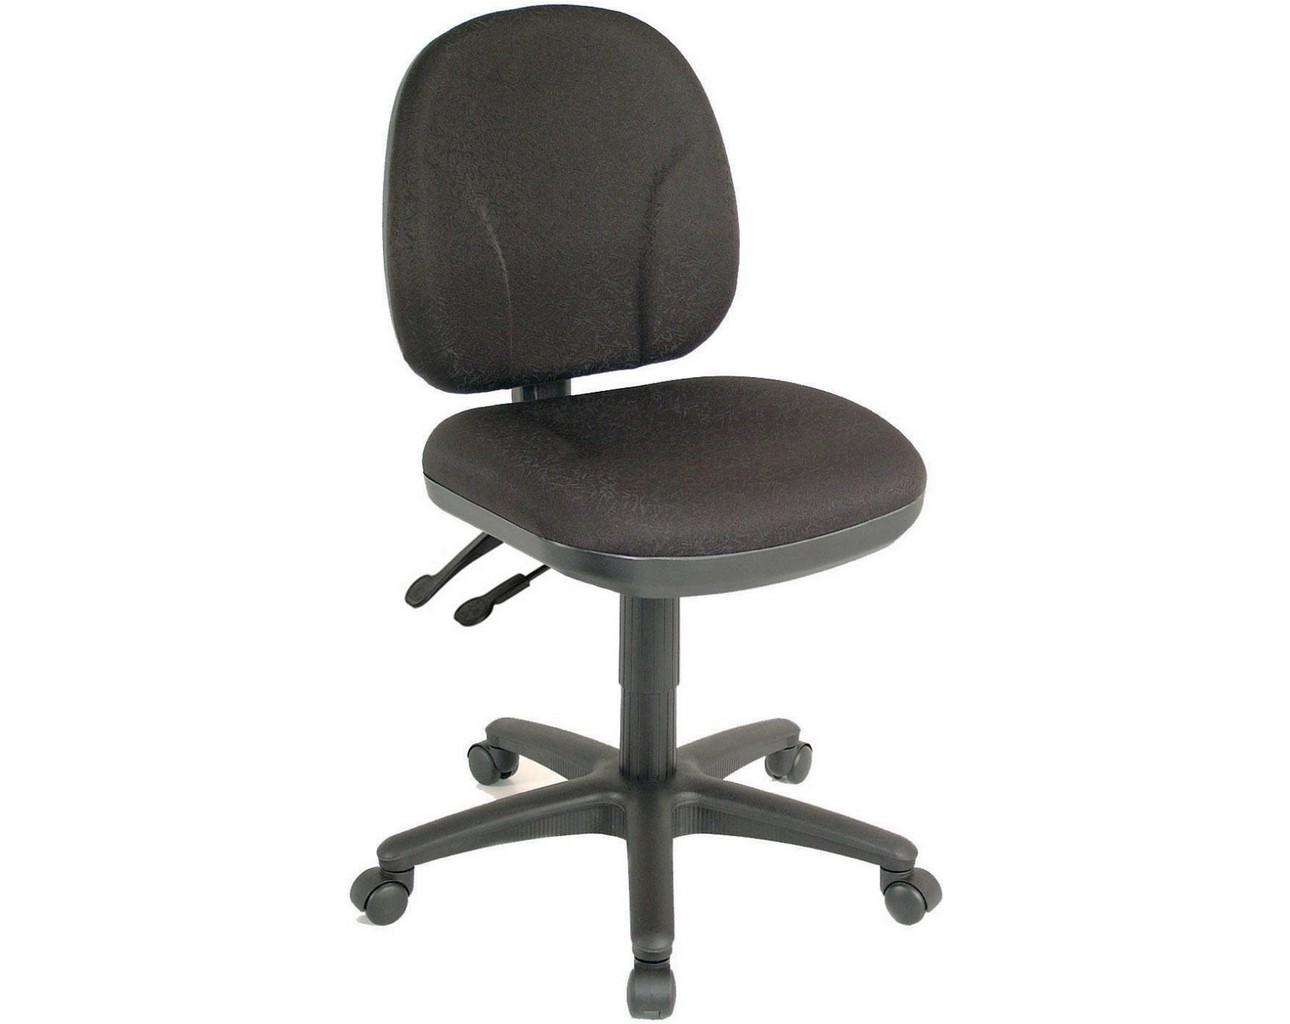 Comformatic Tilt Seat and Back Chair – Black Fabric